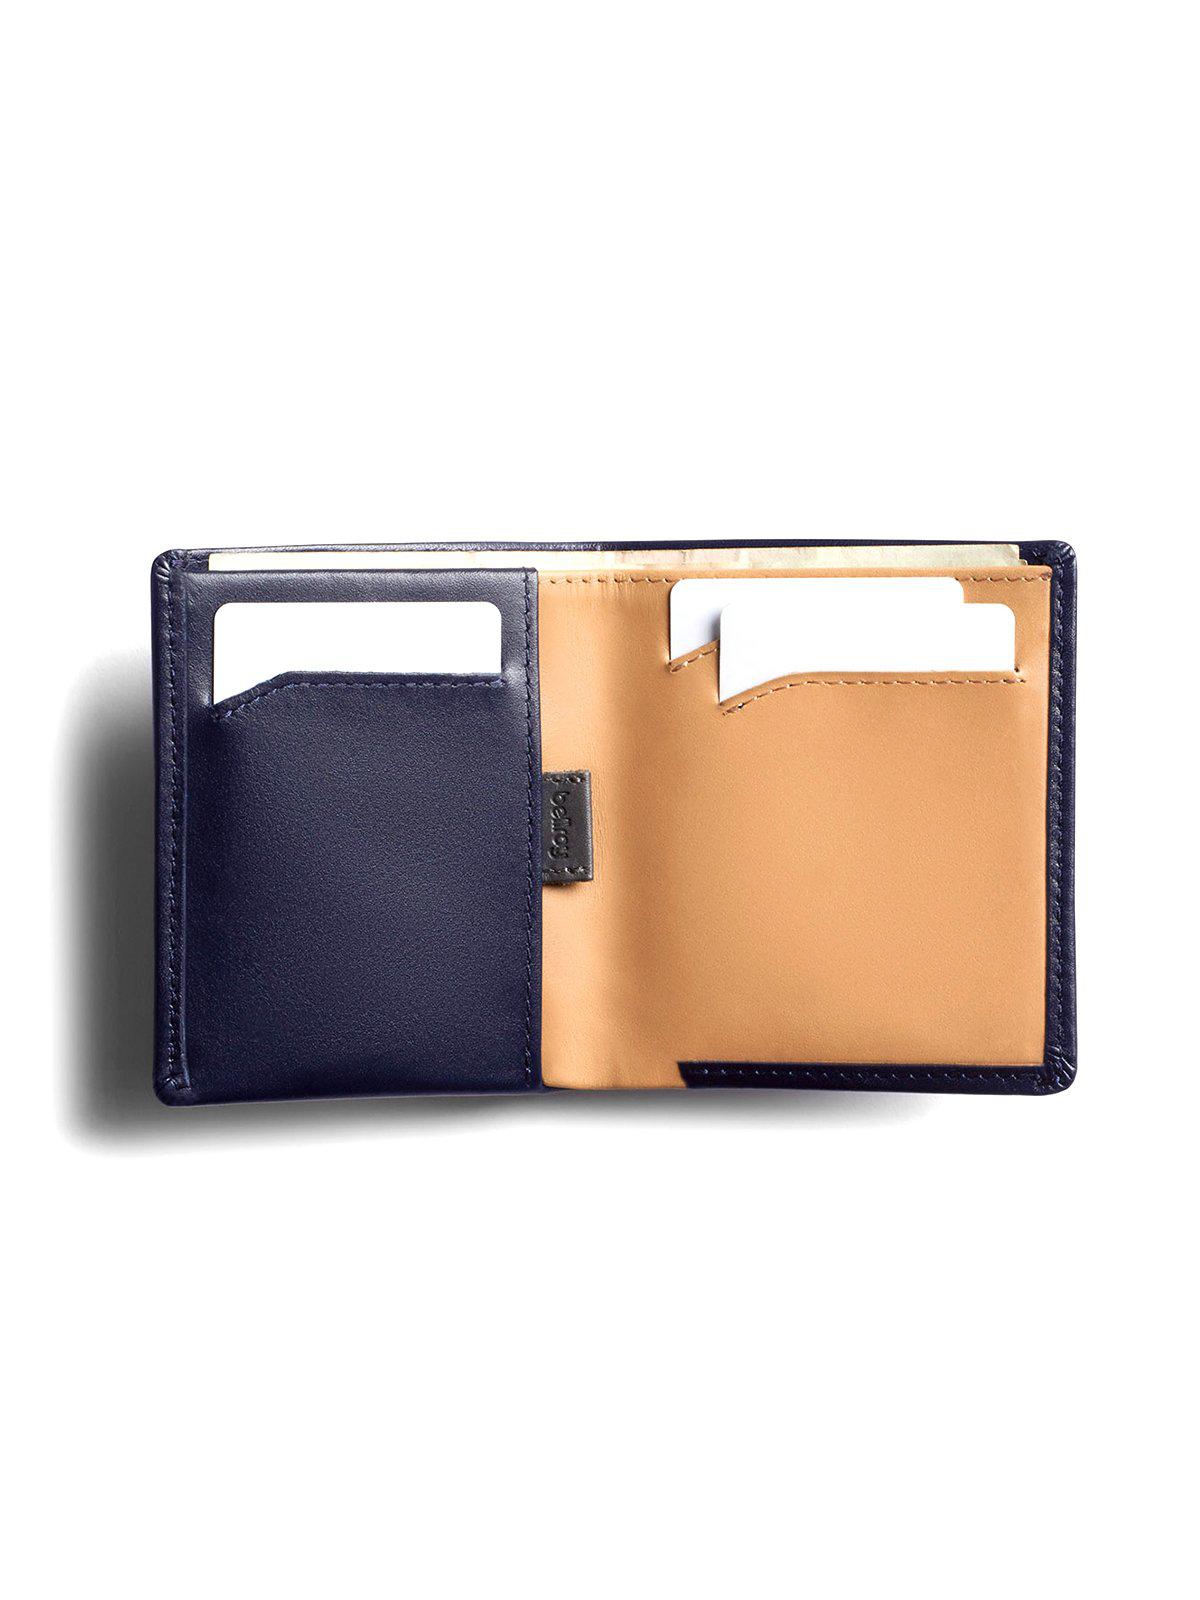 Bellroy Note Sleeve Wallet Navy RFID - MORE by Morello Indonesia